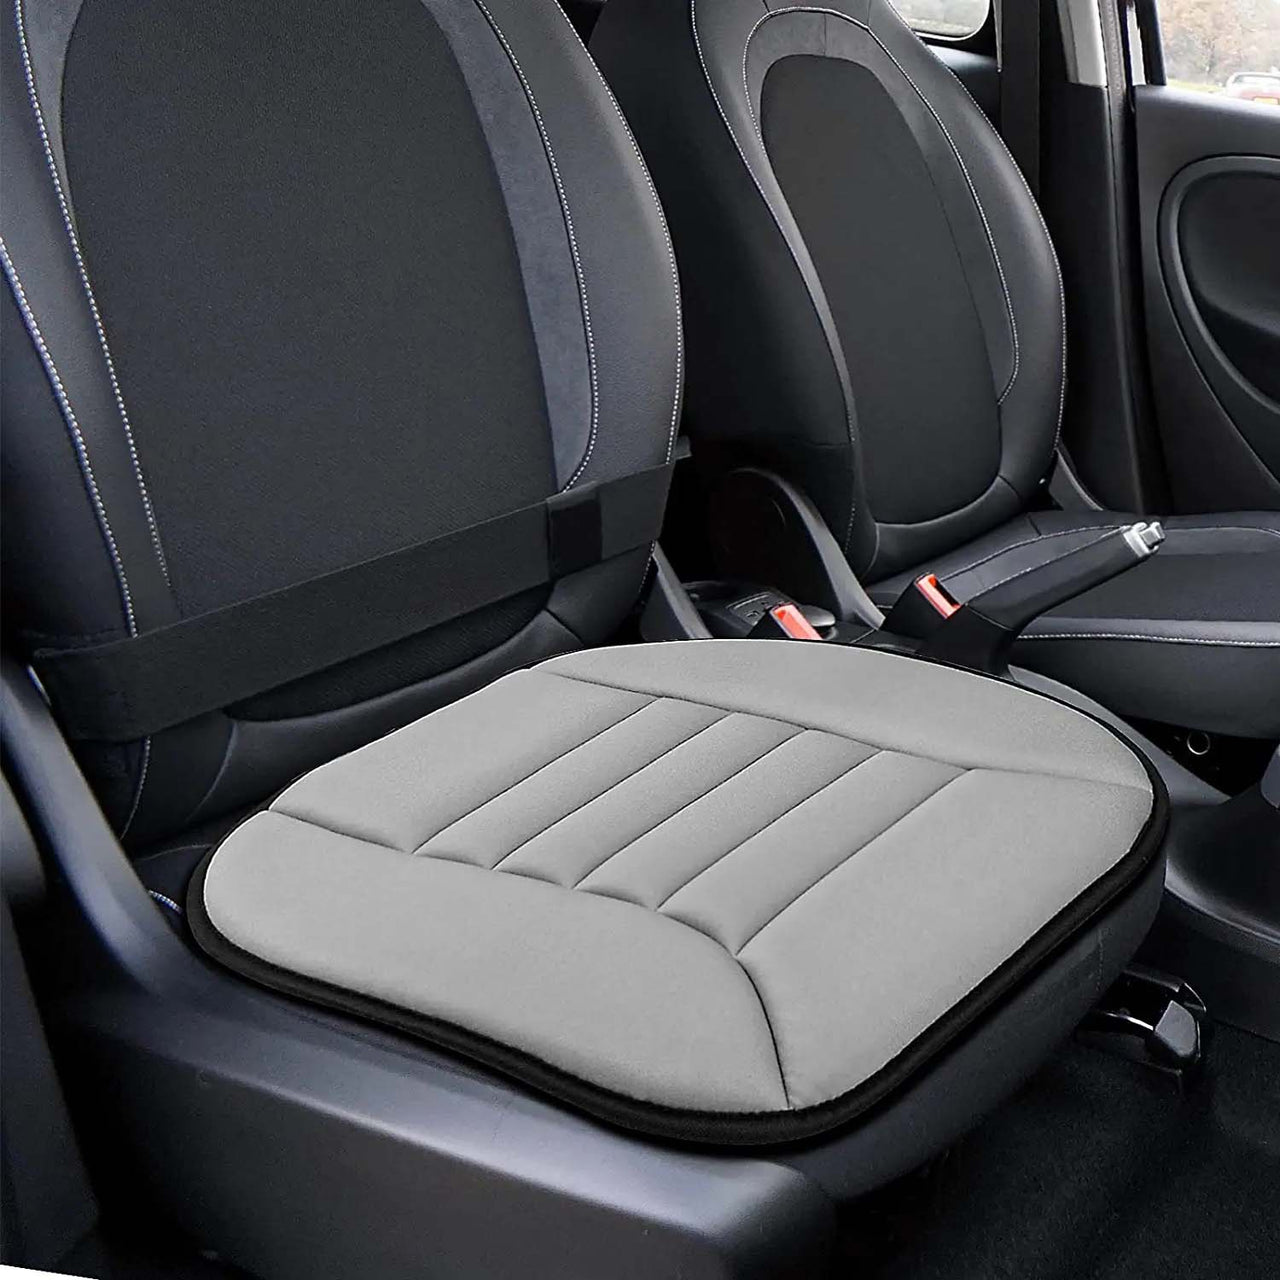 Car Seat Cushion with 1.2inch Comfort Memory Foam, Custom Fit For Your Cars, Seat Cushion for Car and Office Chair LI19989